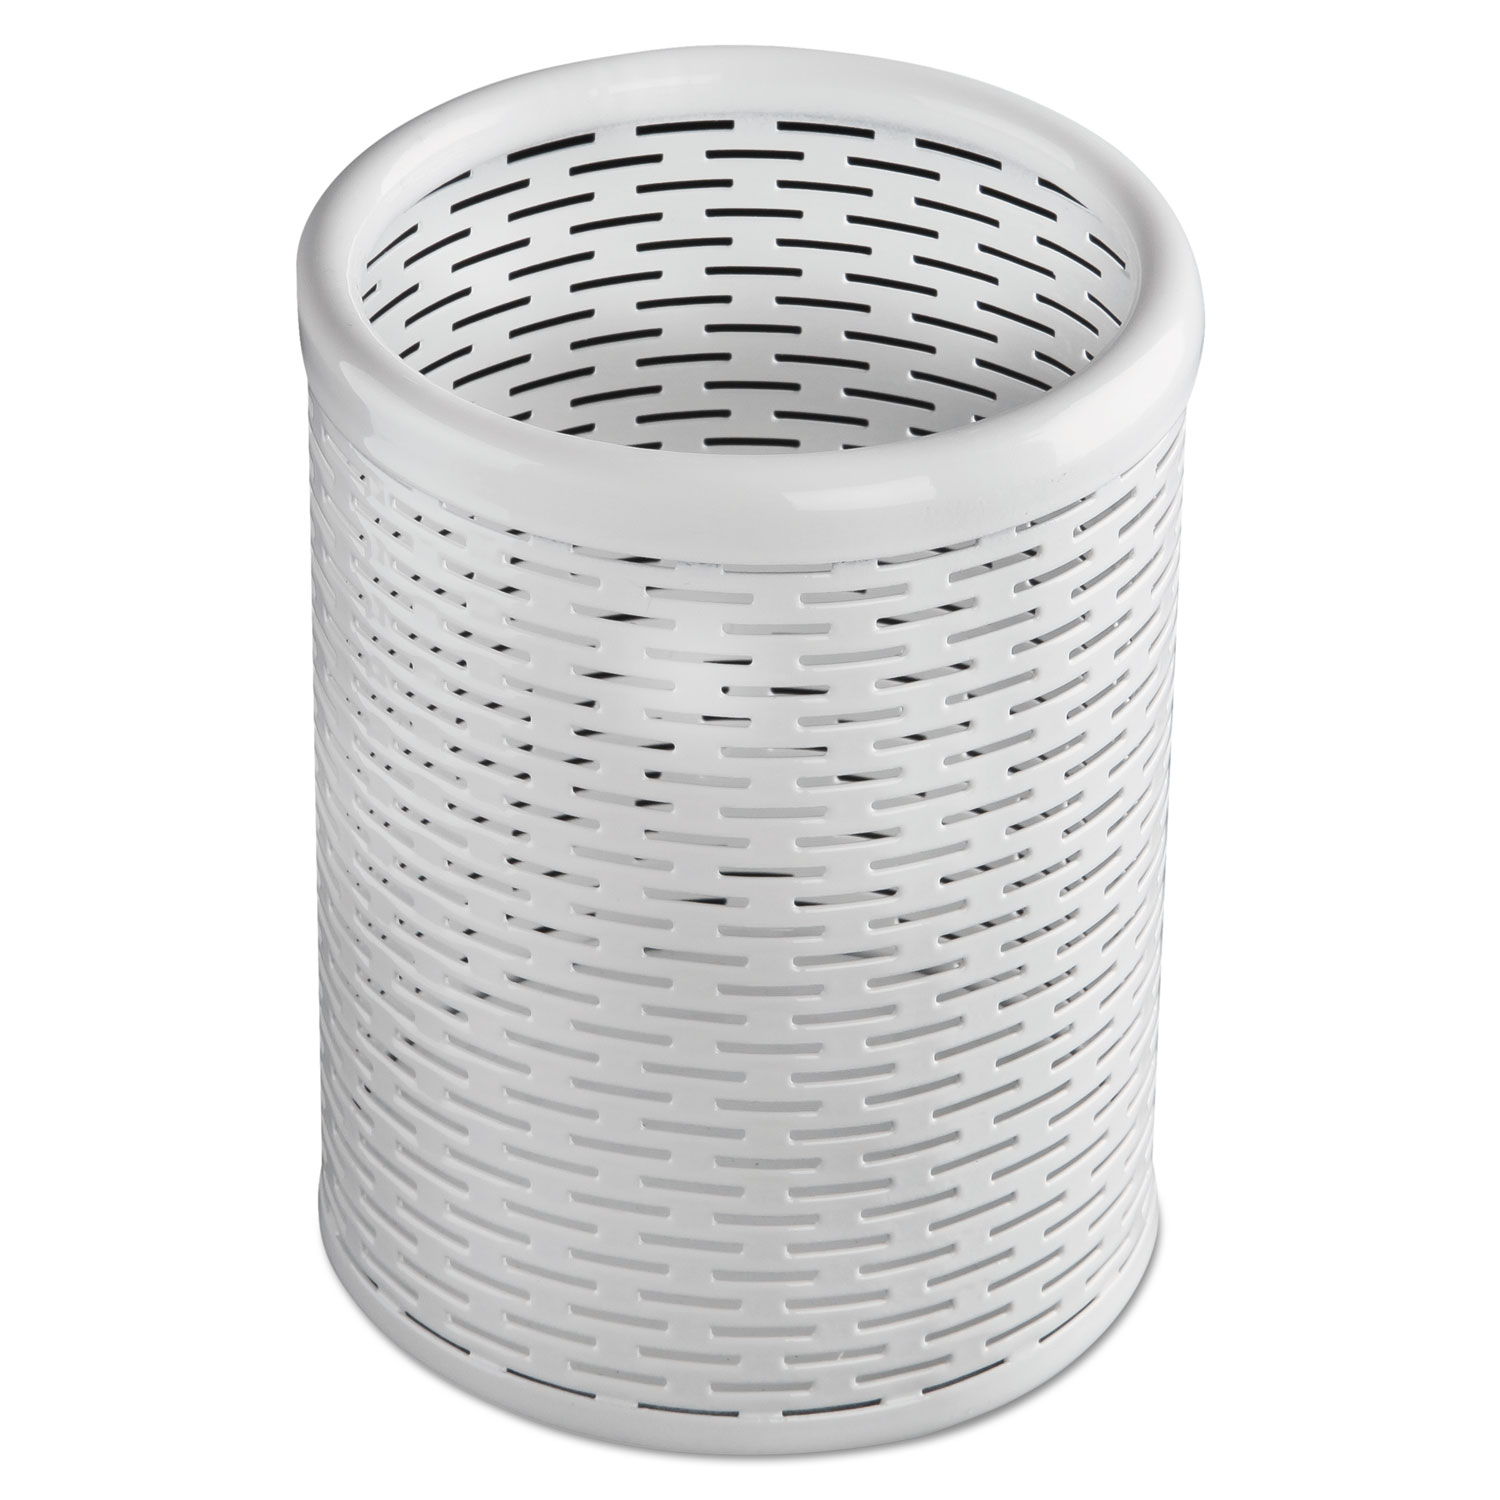 Urban Collection Punched Metal Pencil Cup, 3 1/2 x 4 1/2, White